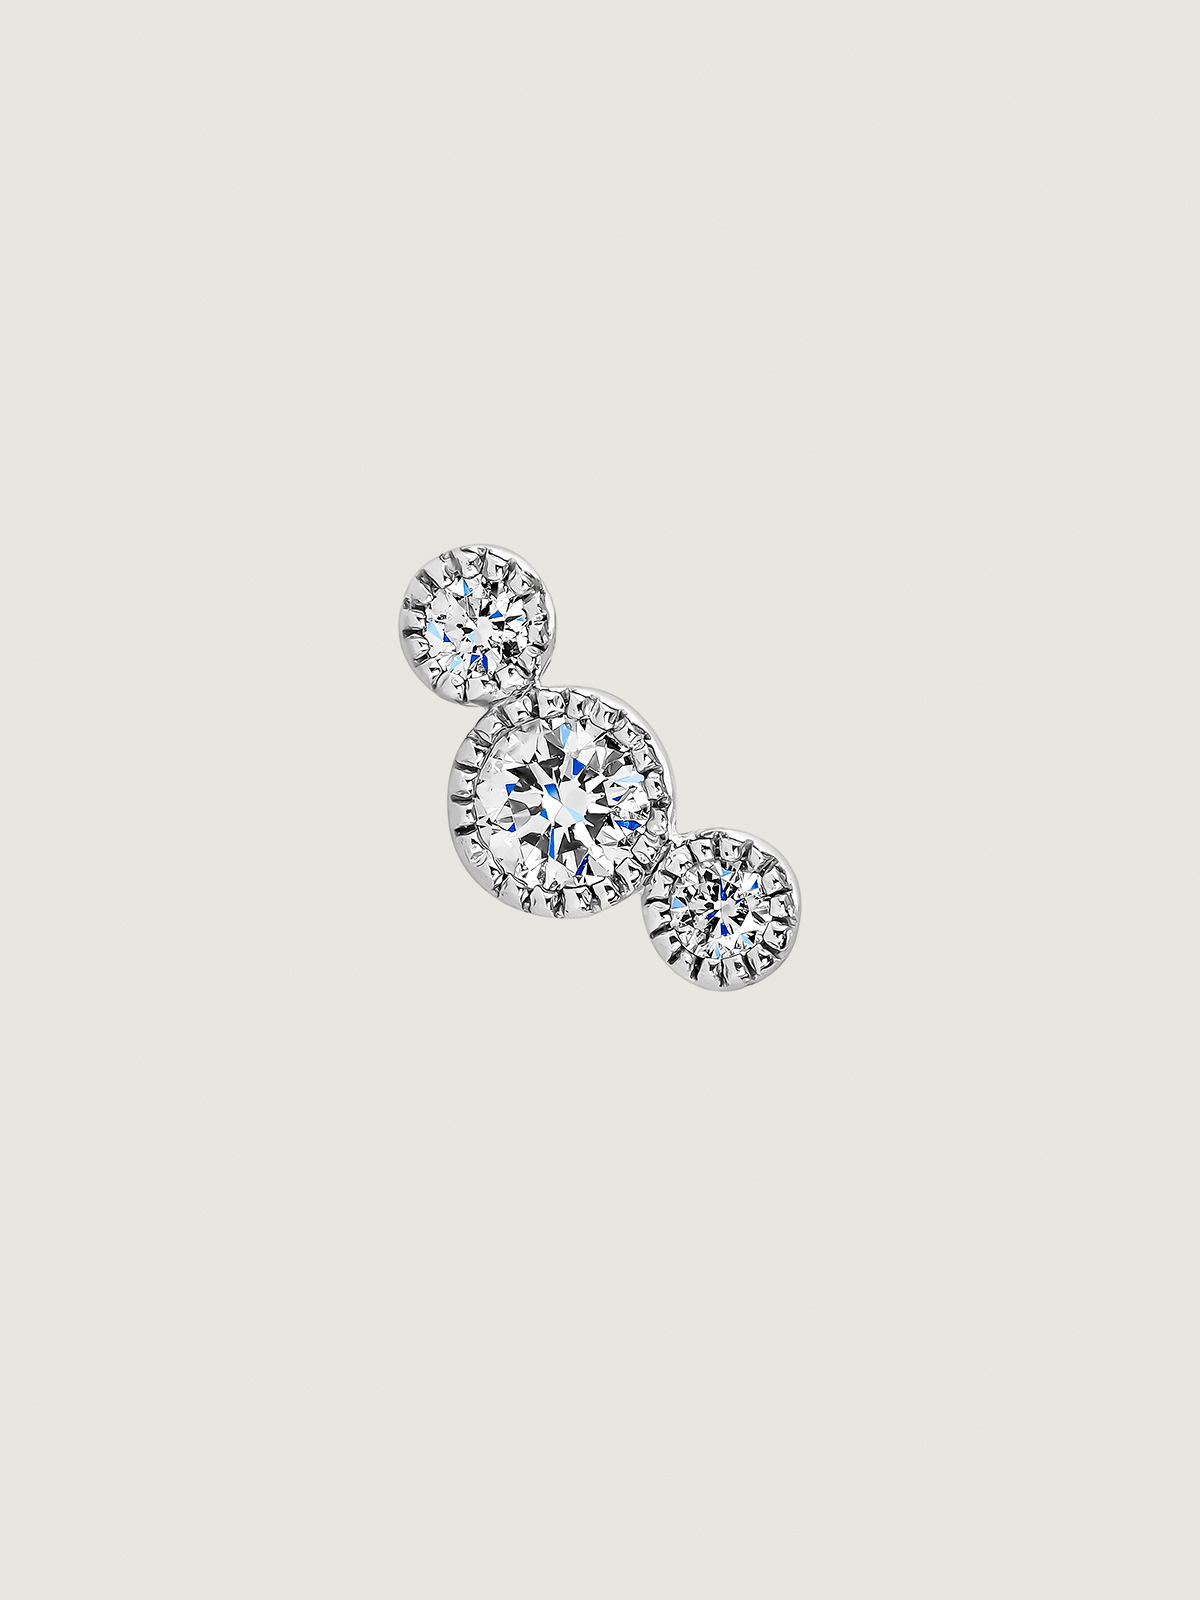 Single 9K white gold earring with 0.097 cts diamonds.